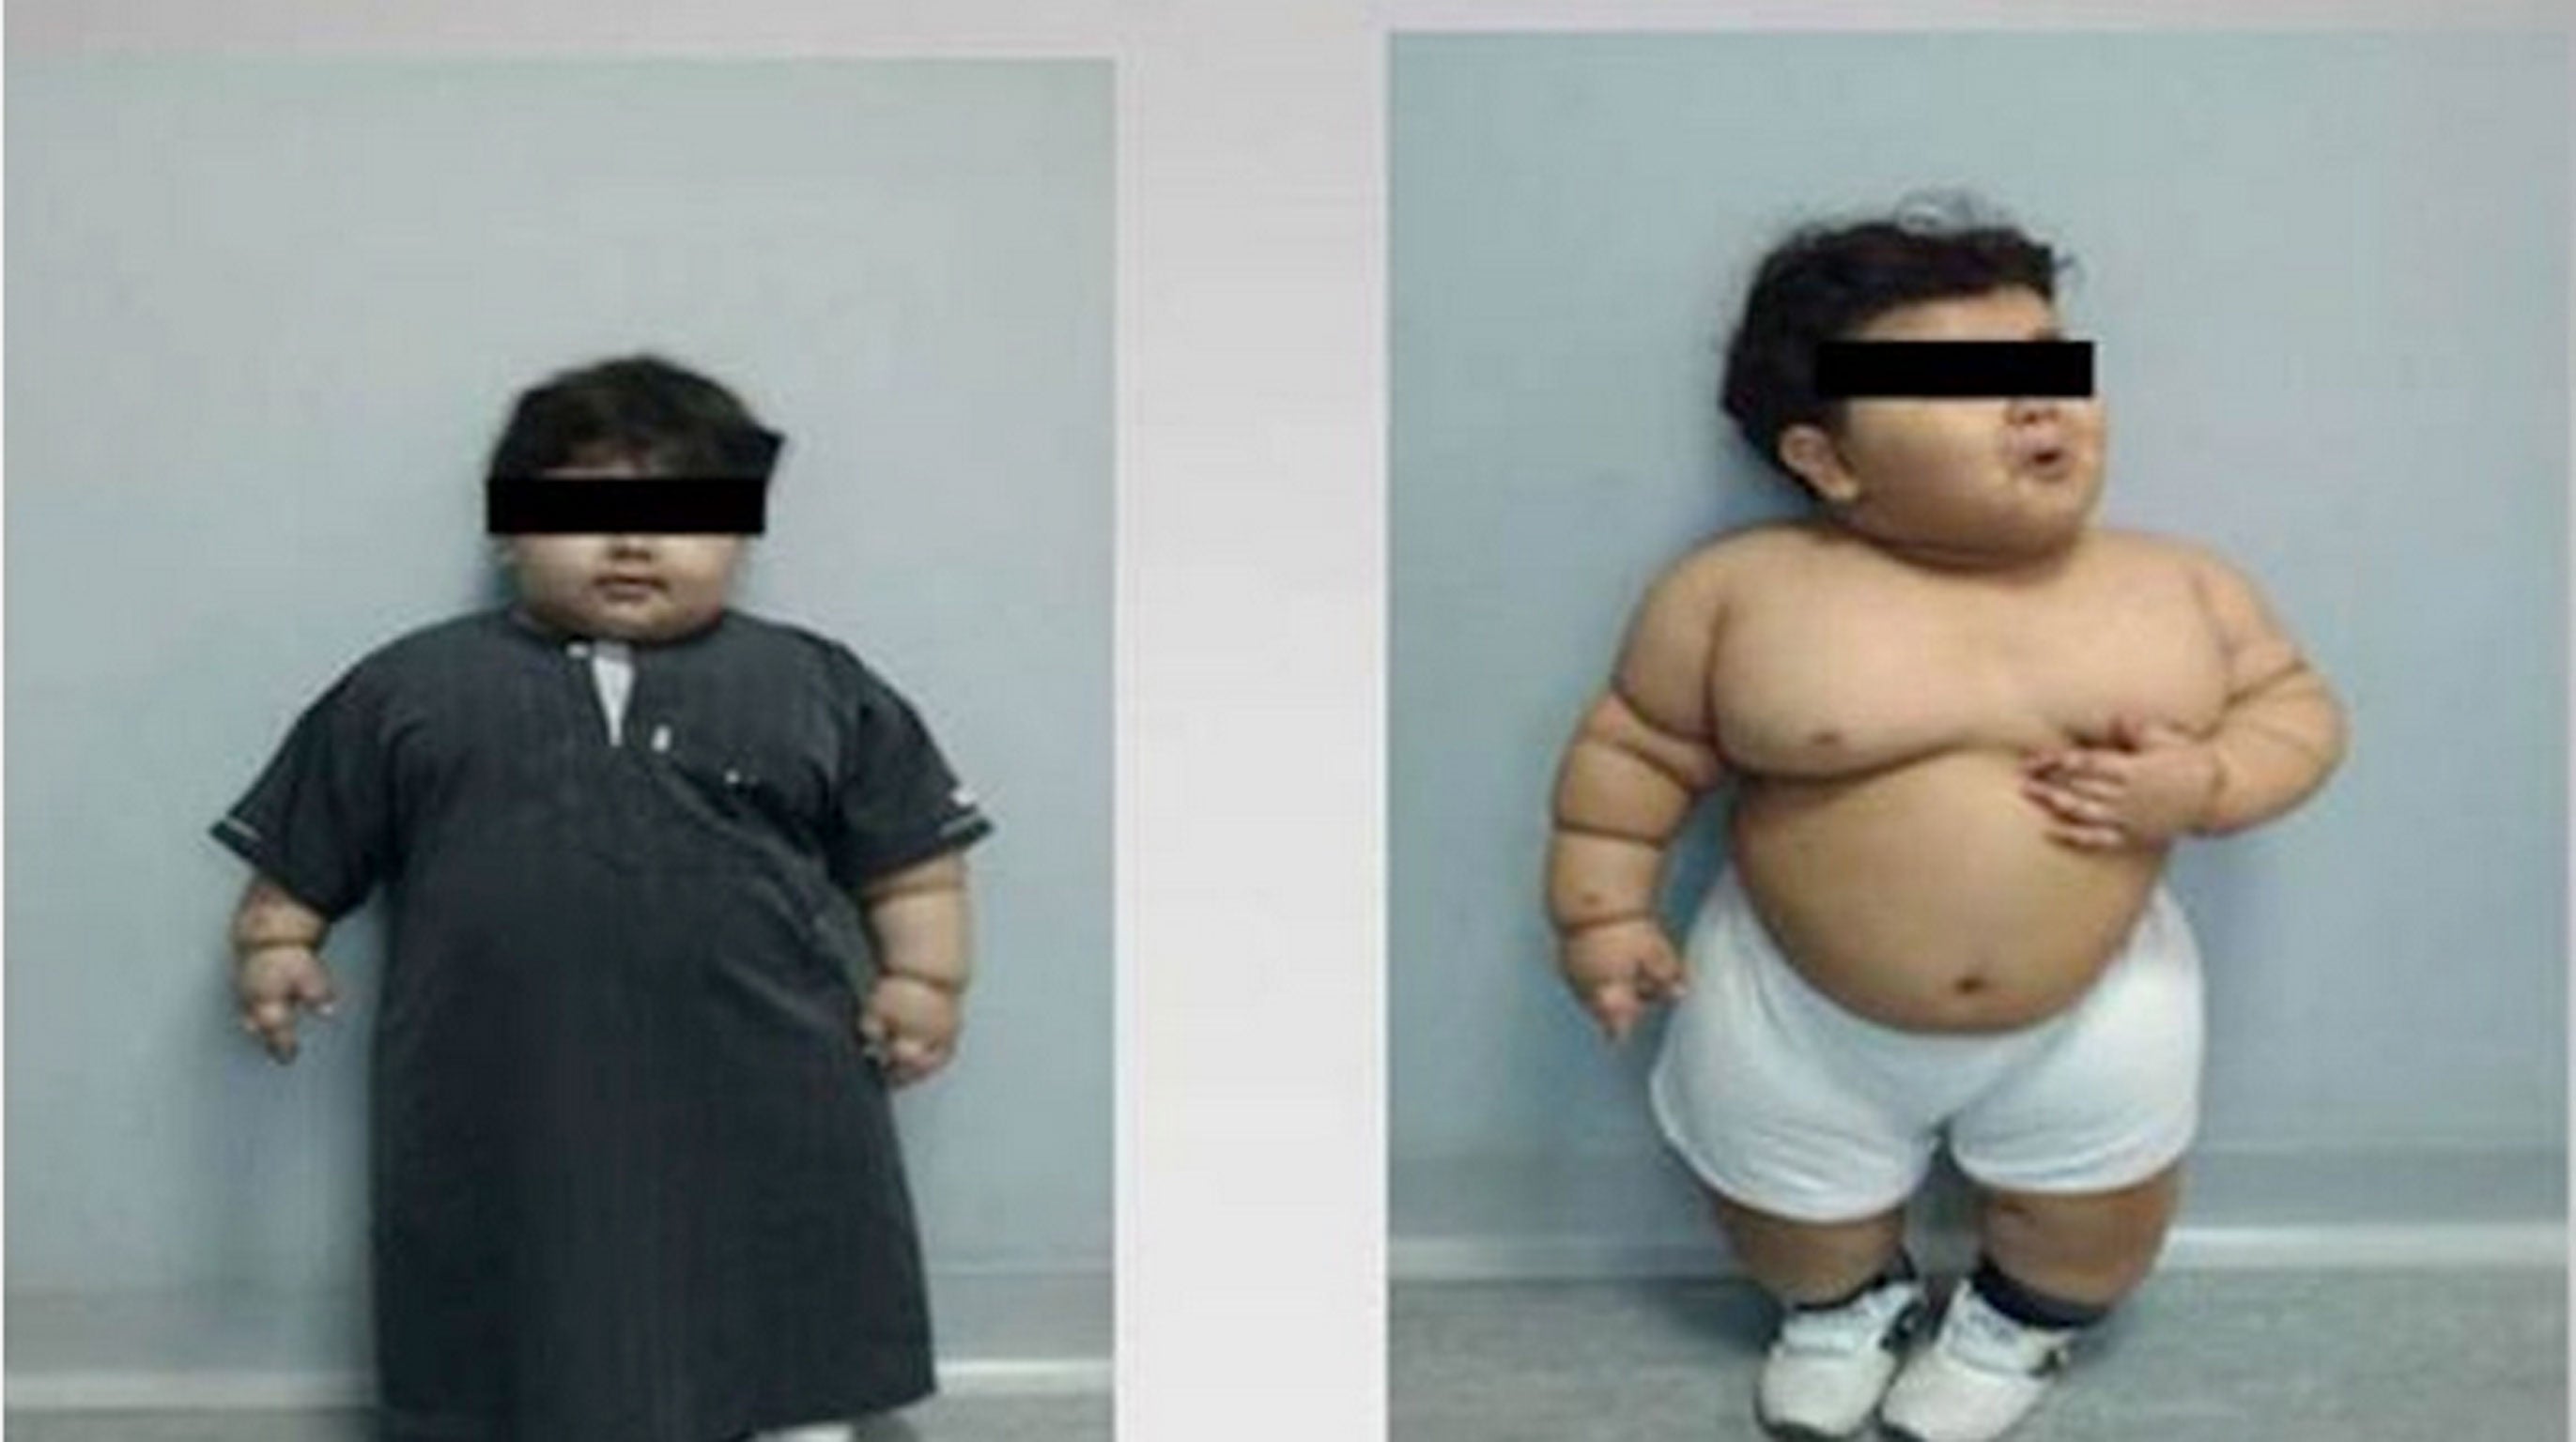 The child had a Body Mass Index of 41 had continued to gain weight despite efforts to control his diet.